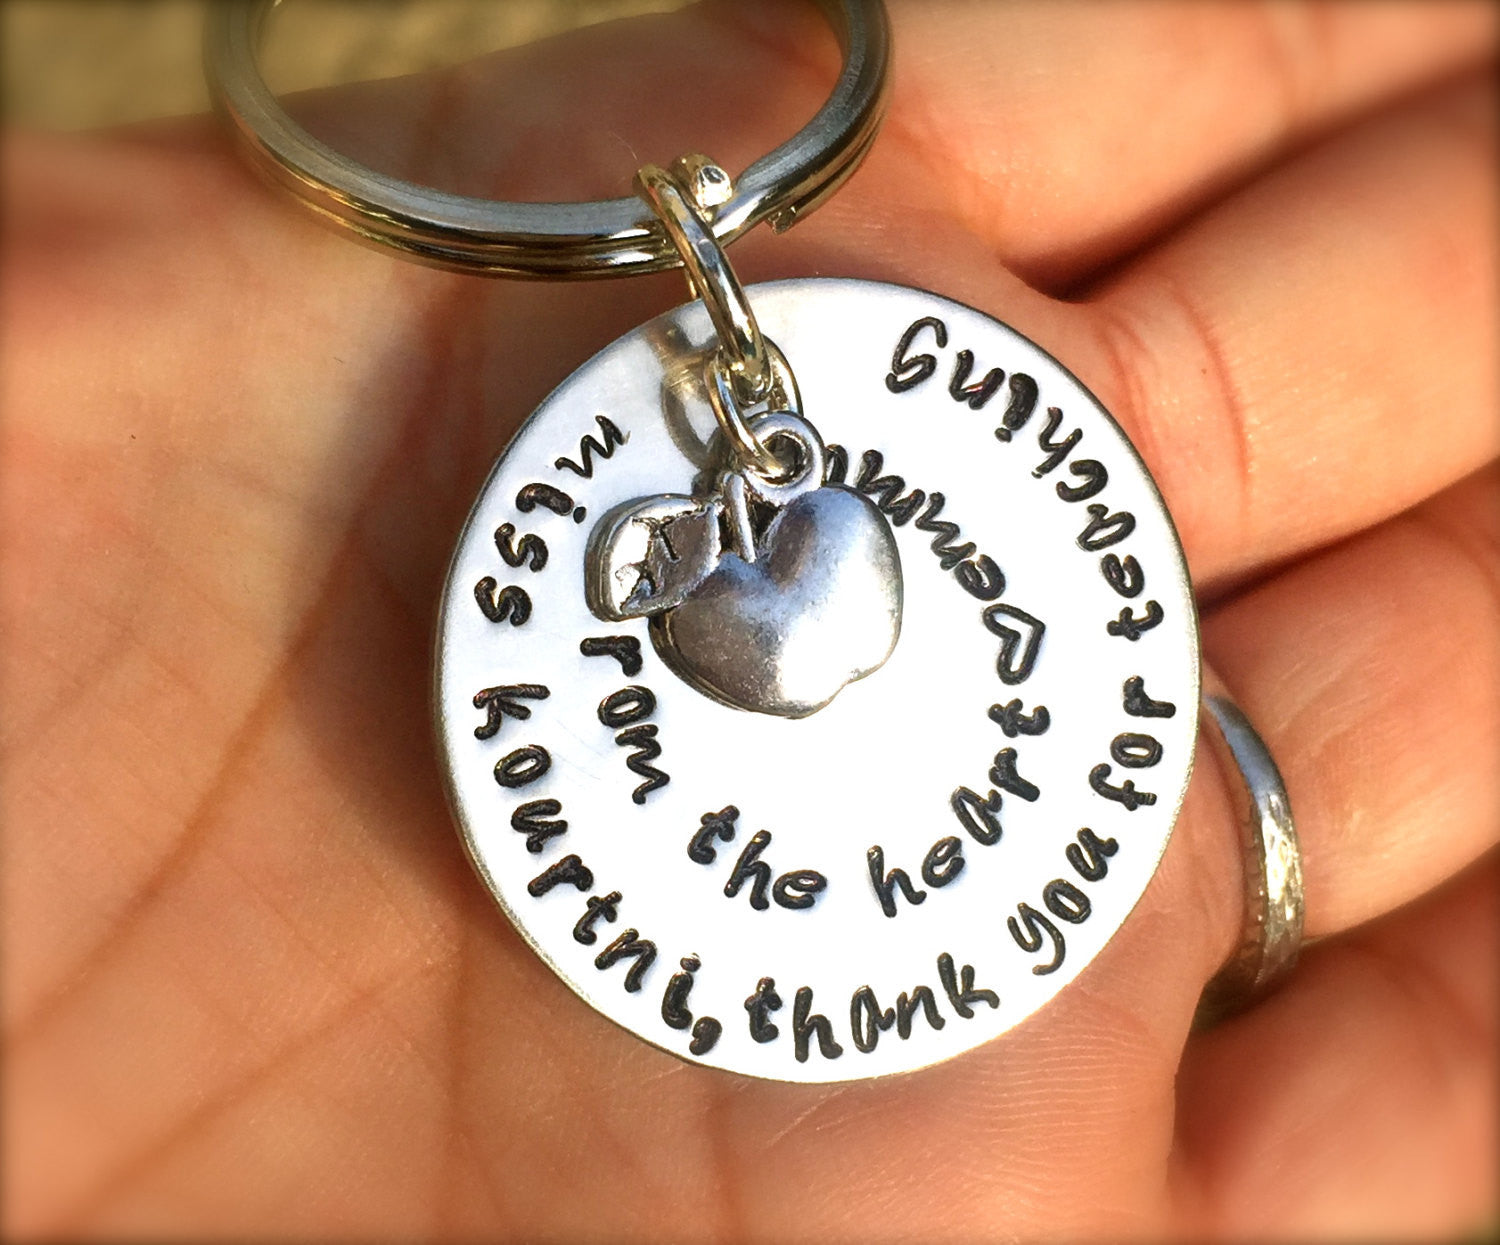 Teacher Gift, Personalized Teacher Gifts - Natashaaloha, jewelry, bracelets, necklace, keychains, fishing lures, gifts for men, charms, personalized, 